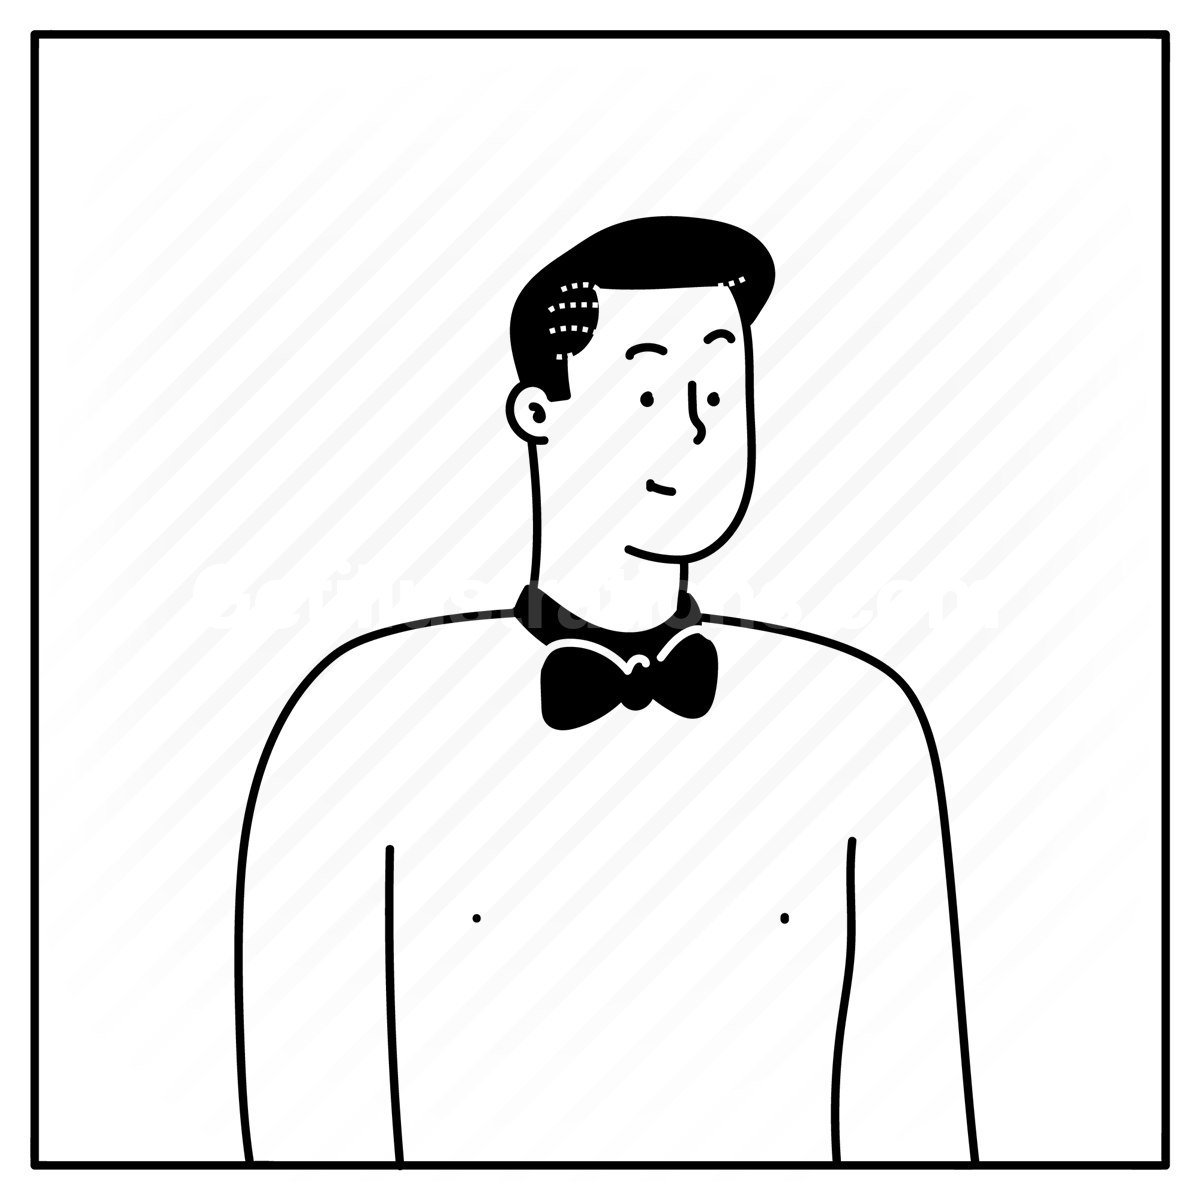 shirtless, naked, bowtie, formal, man, male, person, people